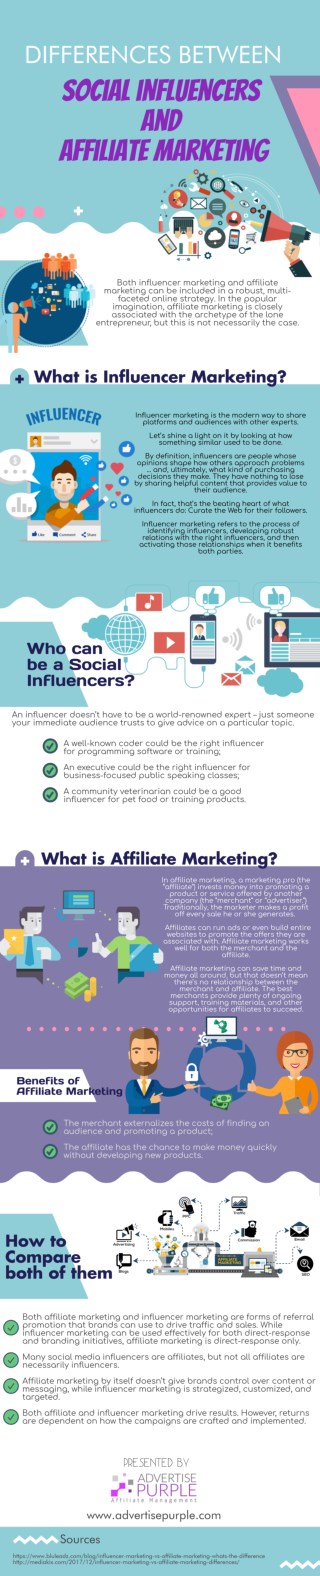 Differences Between Social Influencers and Affiliate Marketers